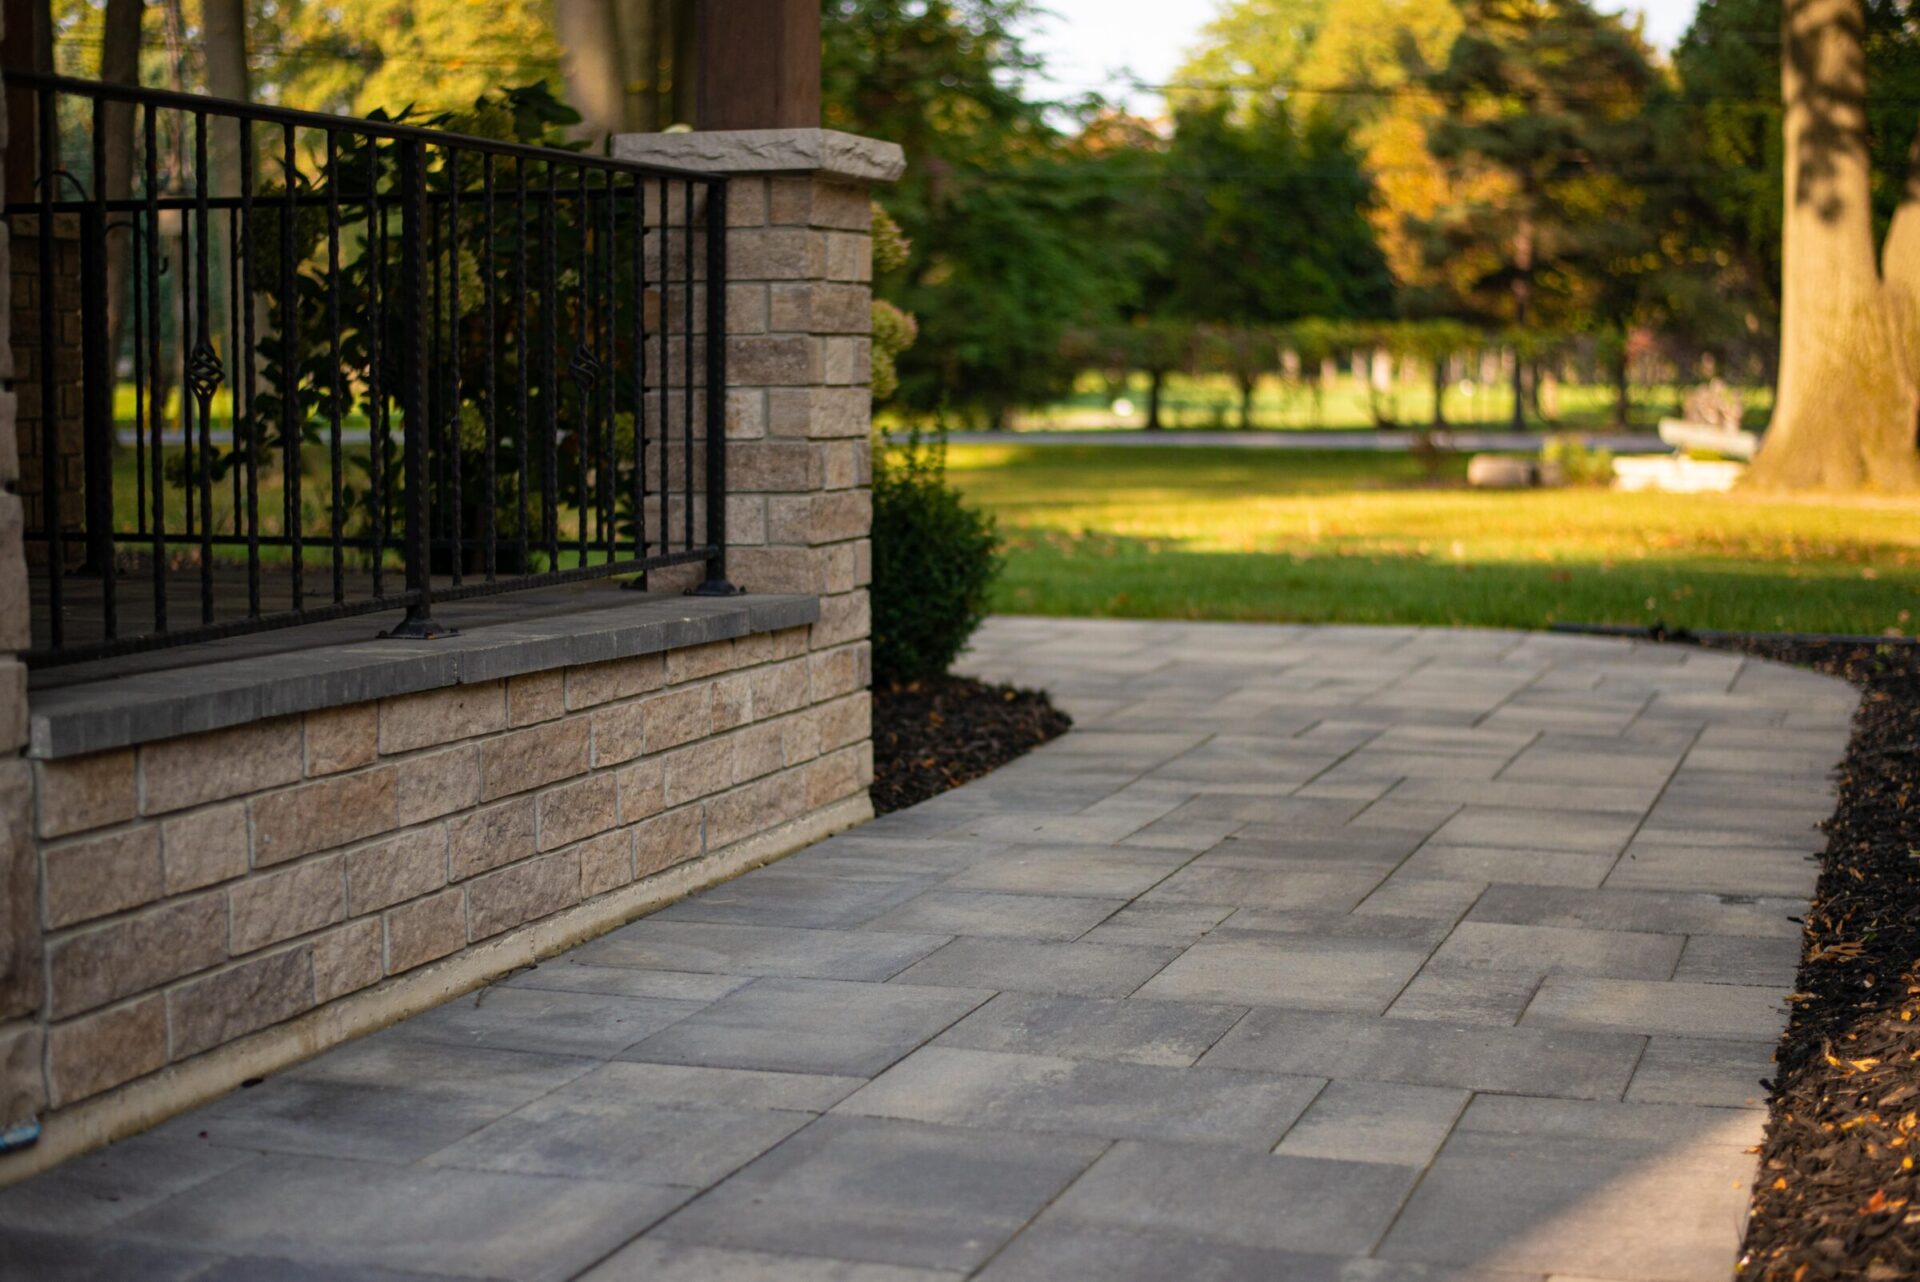 This image shows a paved pathway leading to an iron fence and brick column, with a garden and trees in the soft-focused background at dusk.